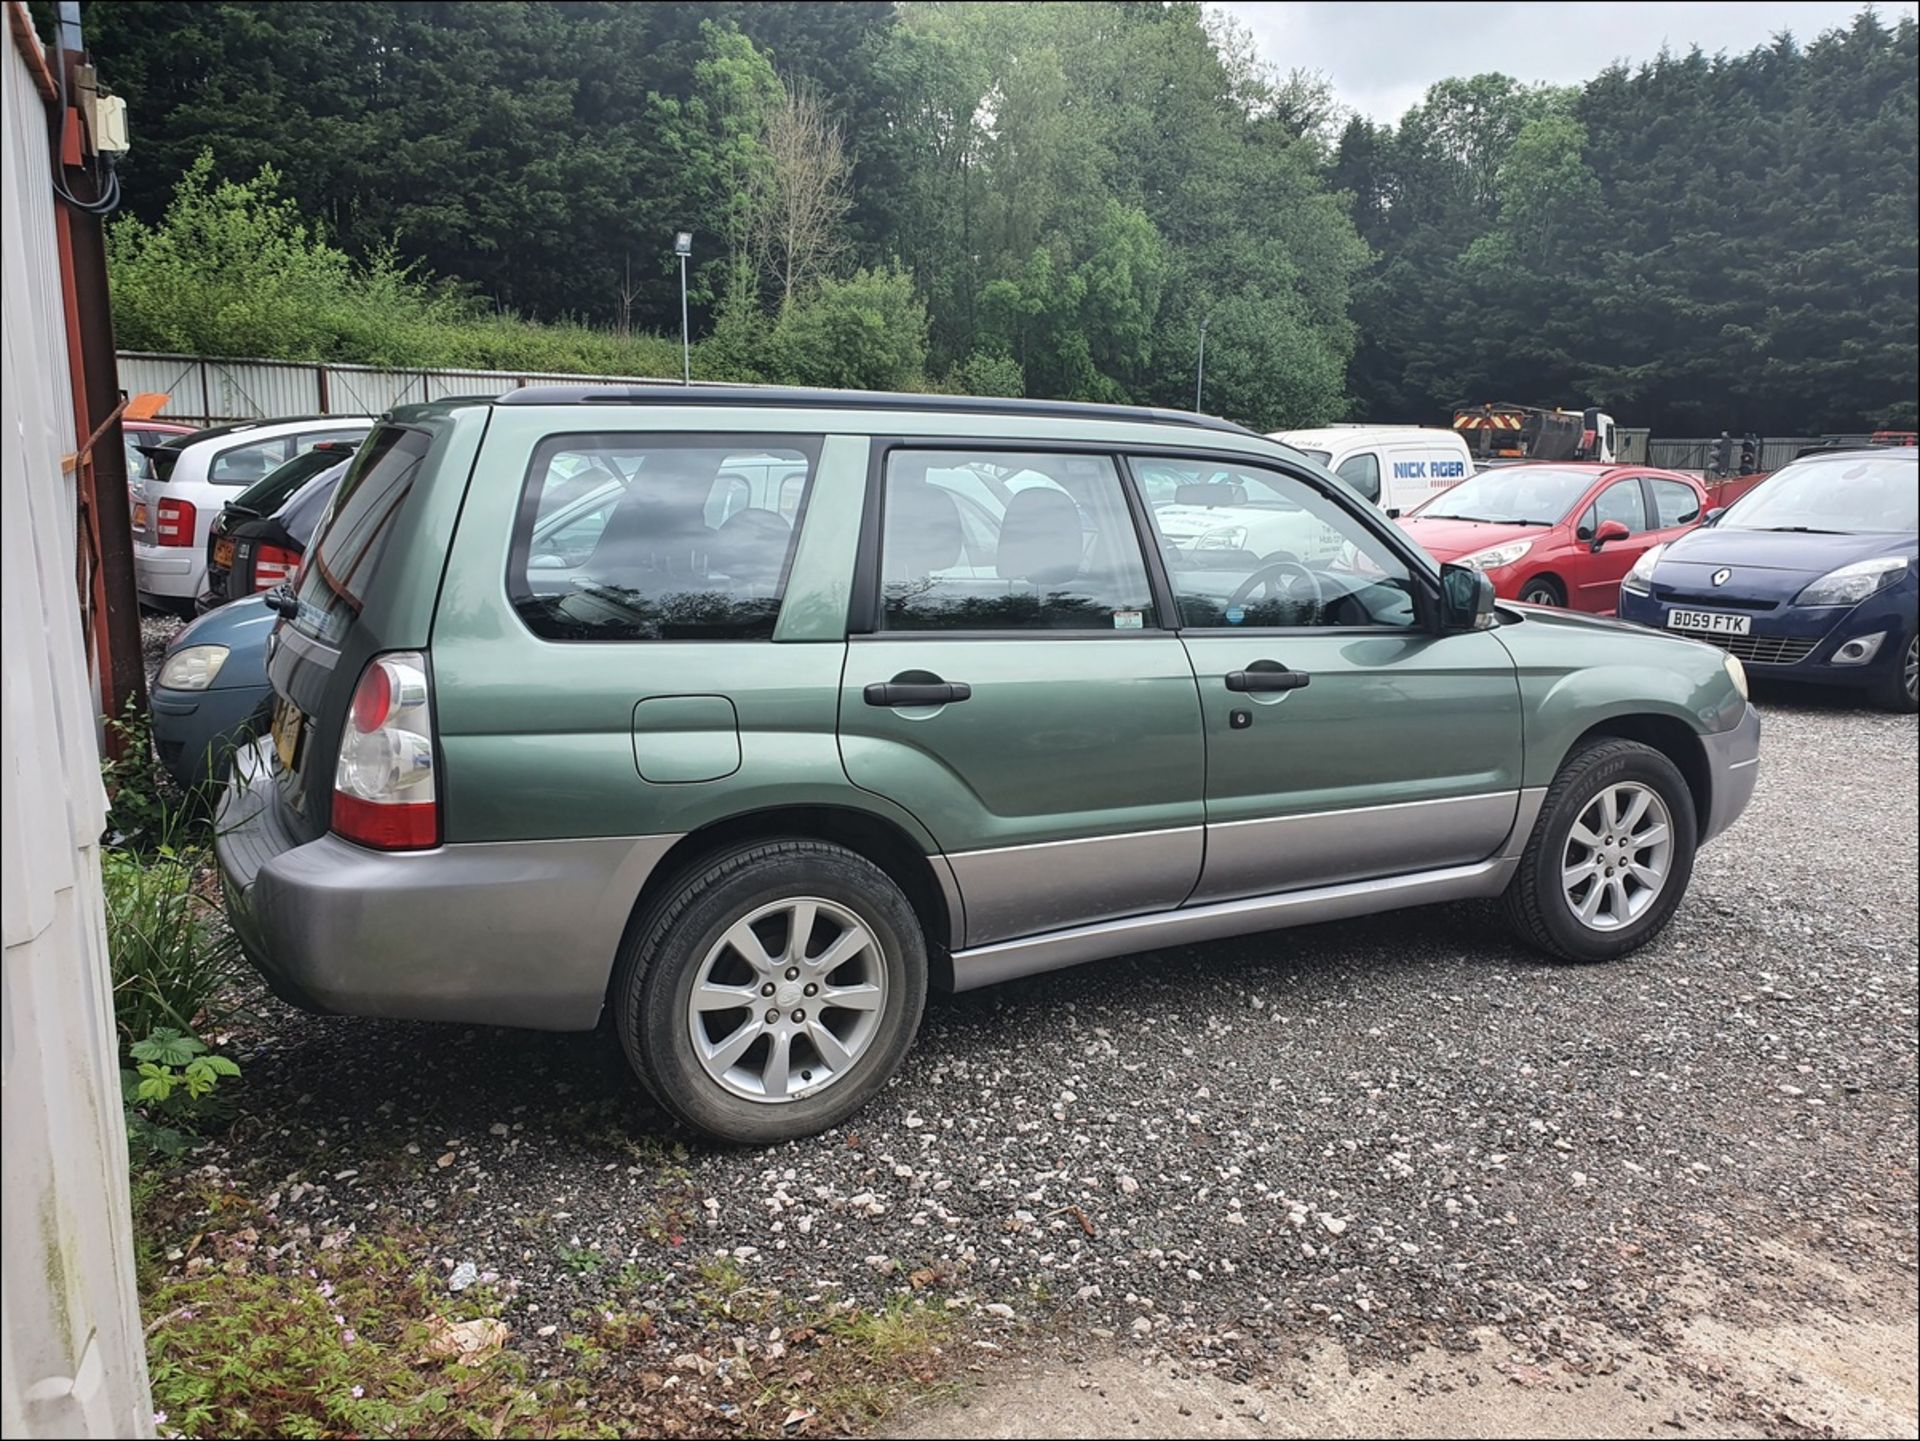 08/08 SUBARU FORESTER XC - 1994cc 5dr Estate (Green, 128k) - Image 6 of 11